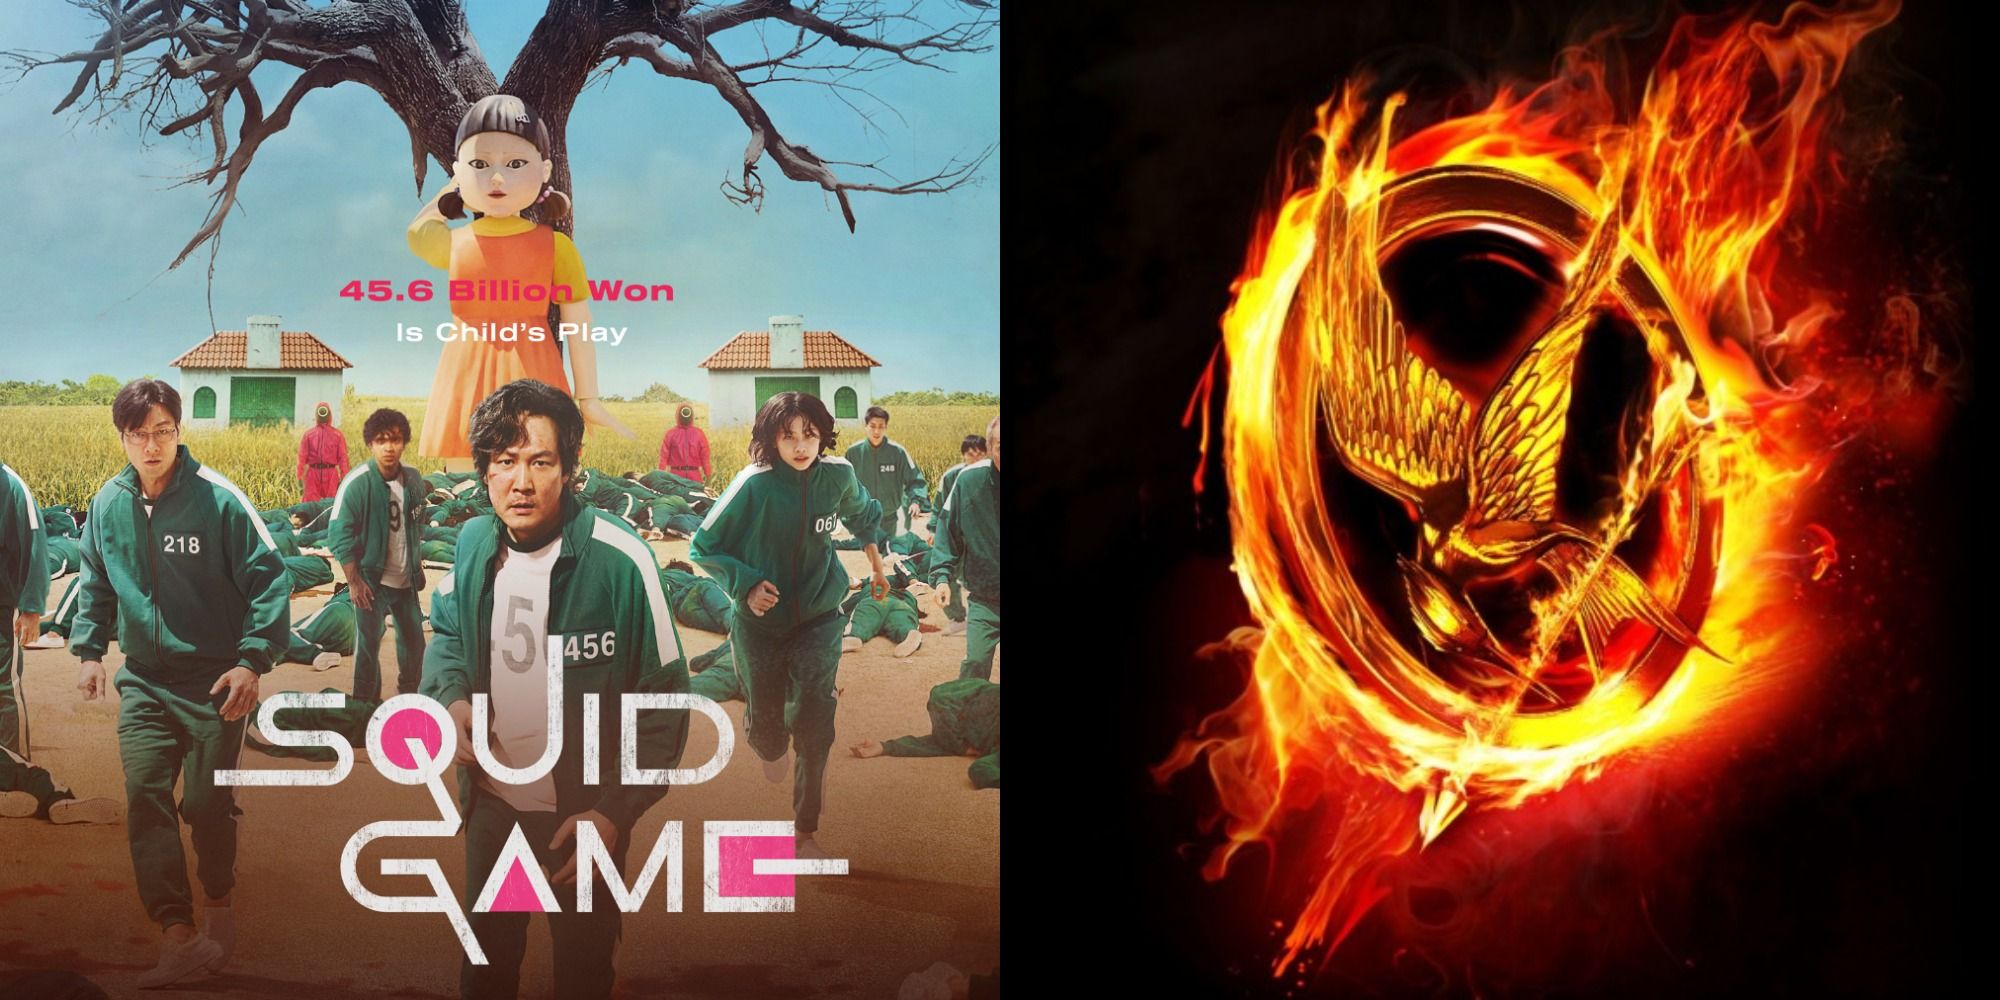 Split image showing a poster for Squid Game and the flaming logo of the Hunger Games